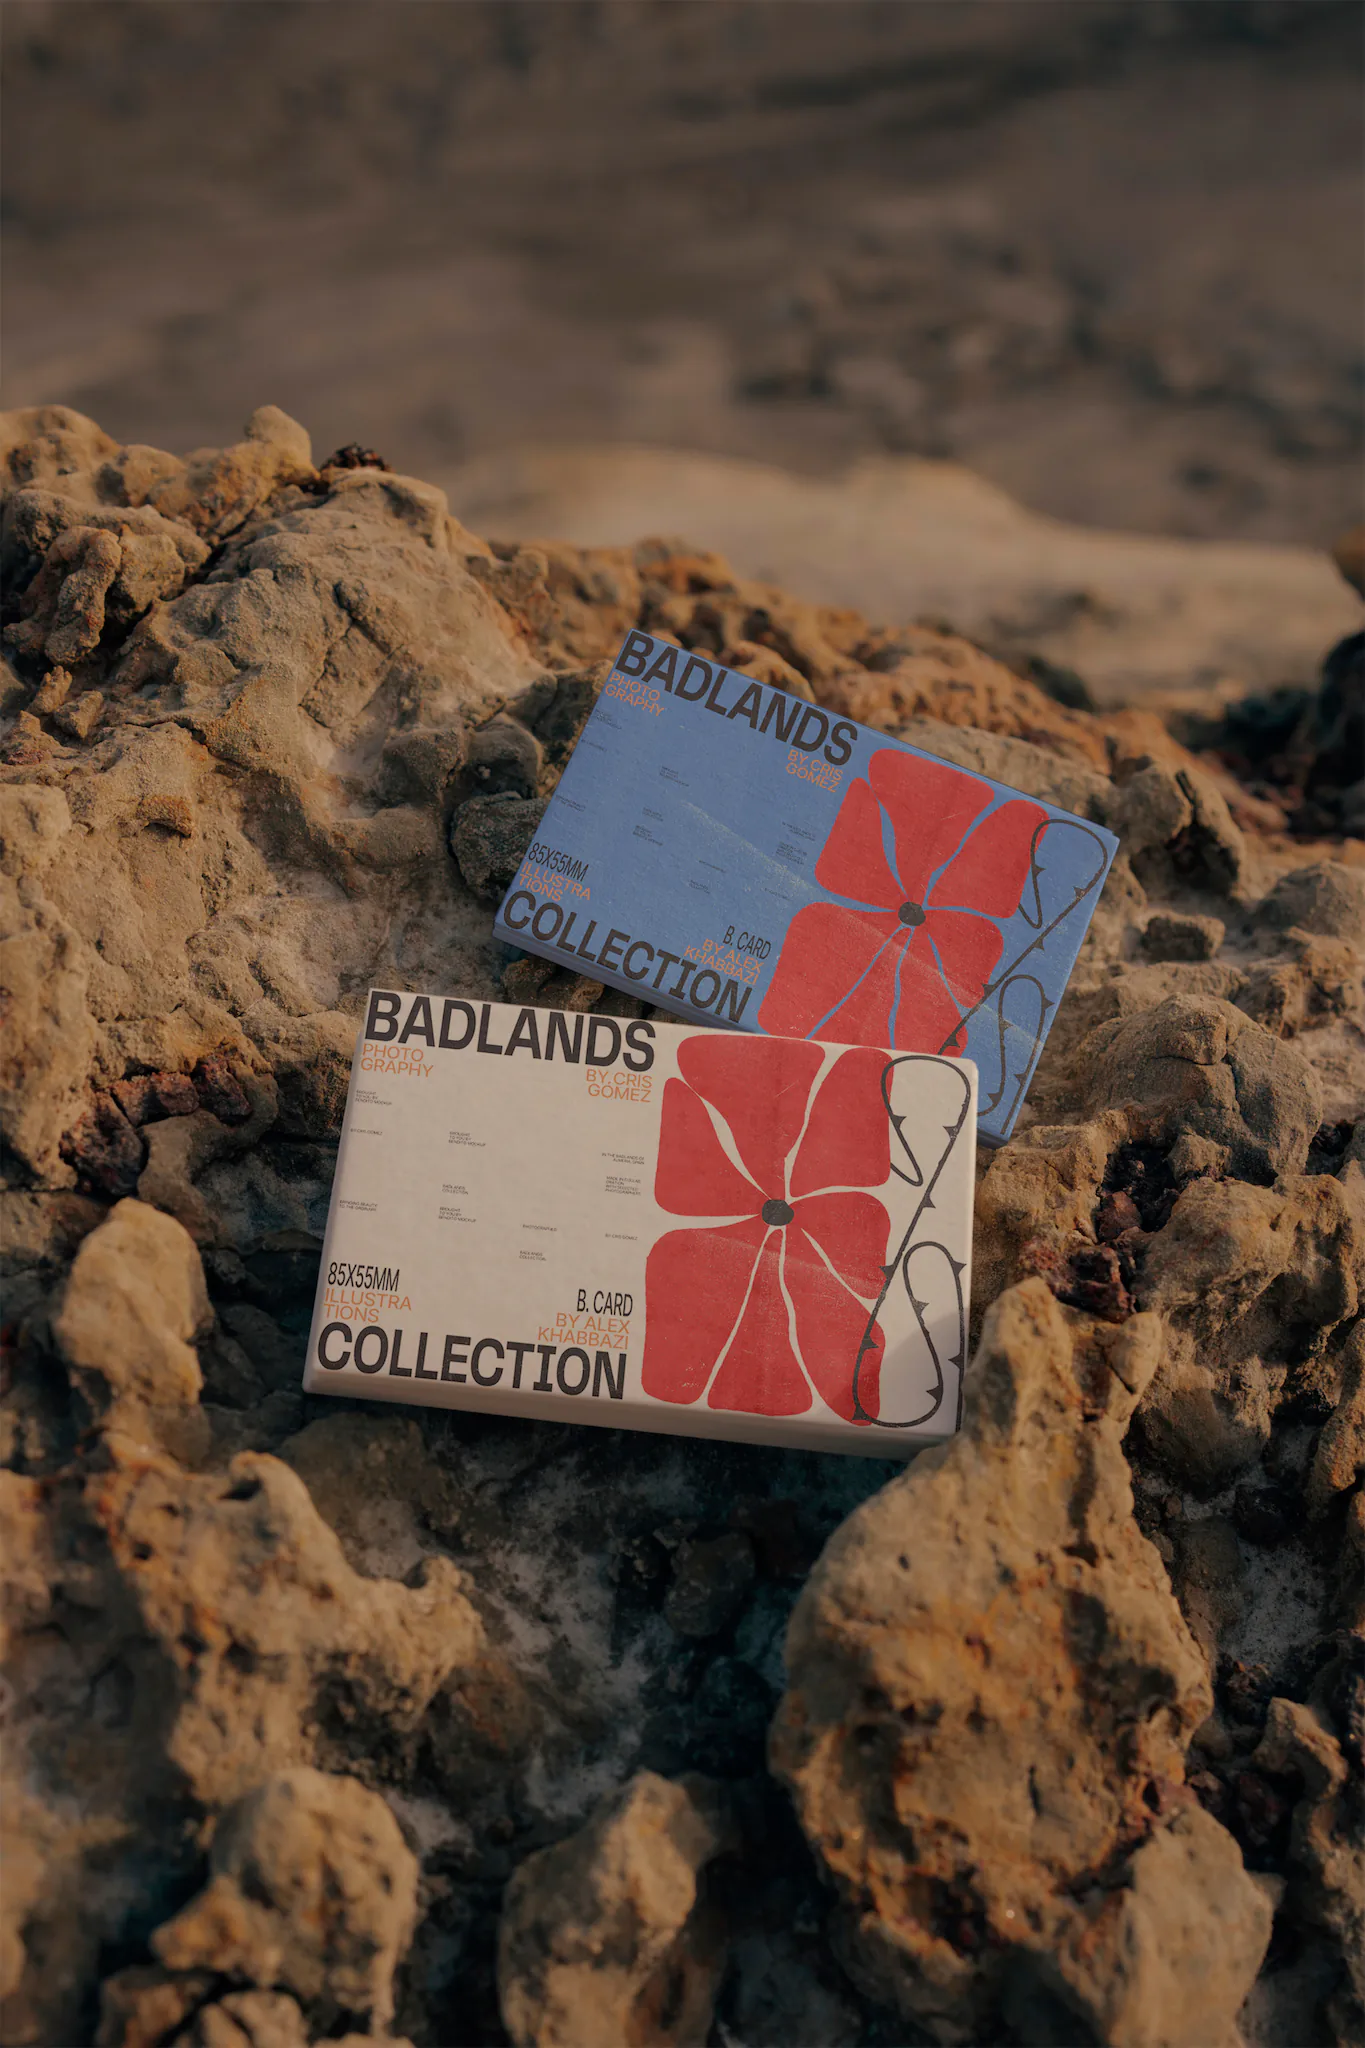 2 blocks of business card mock-ups on a rocky surface